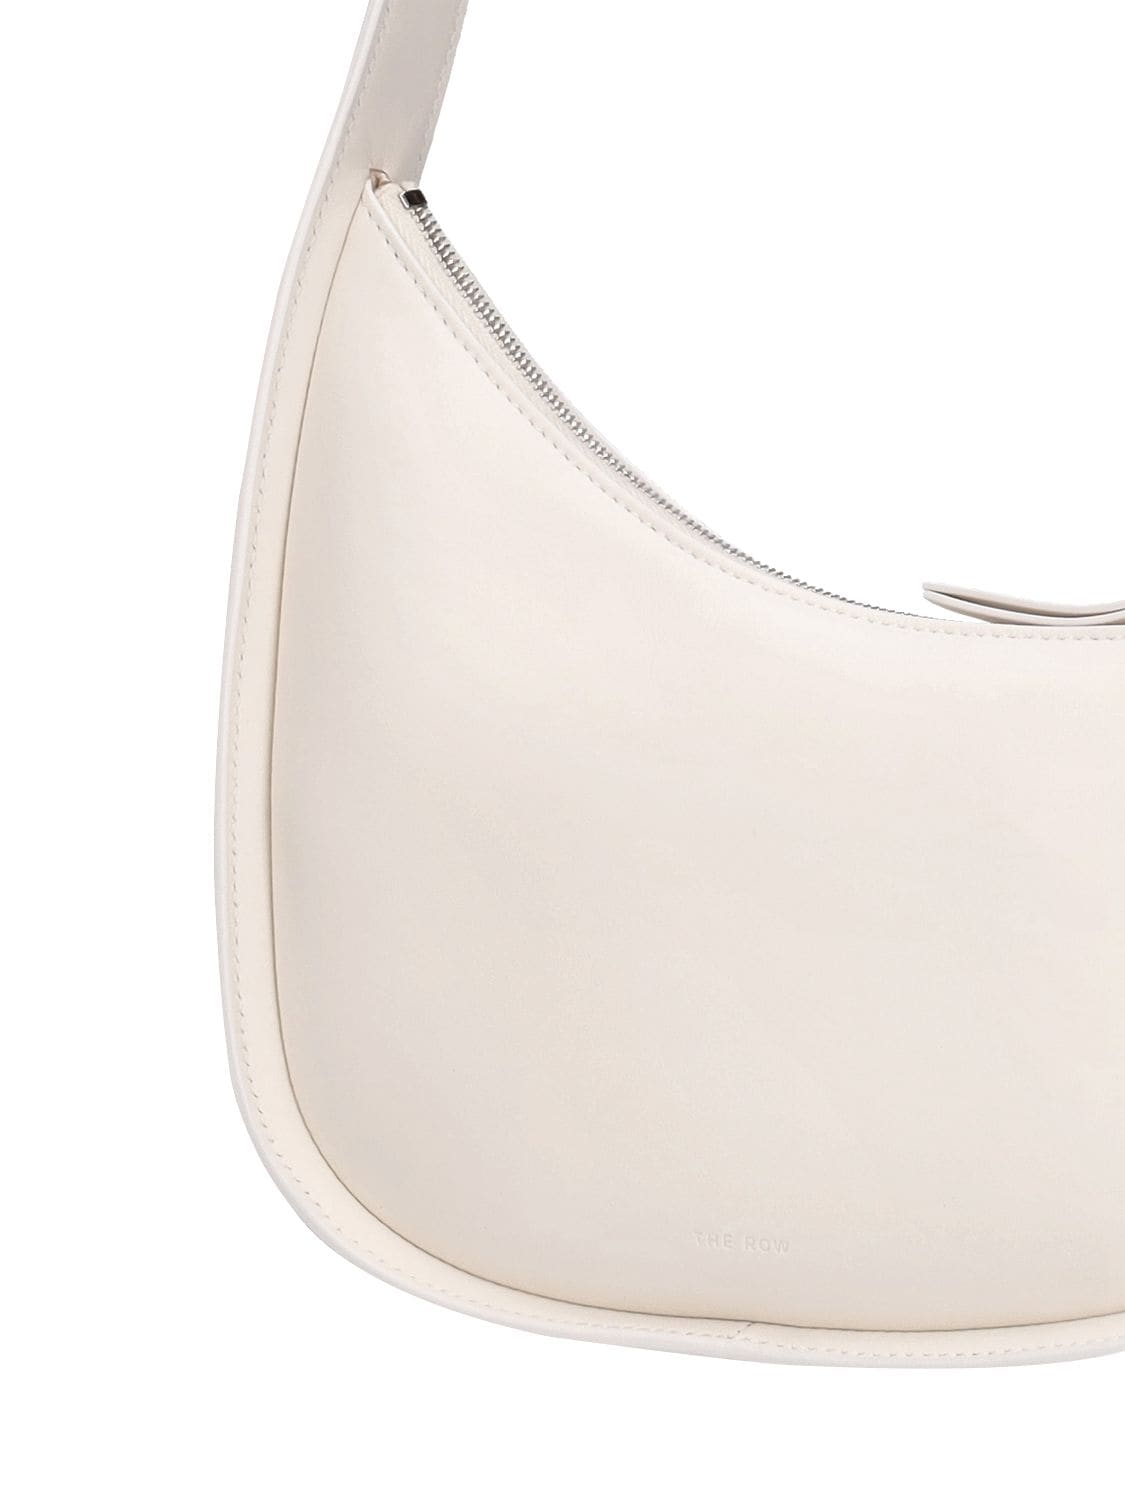 Shop The Row Smooth Leather Half Moon Shoulder Bag In New Ivory Pld